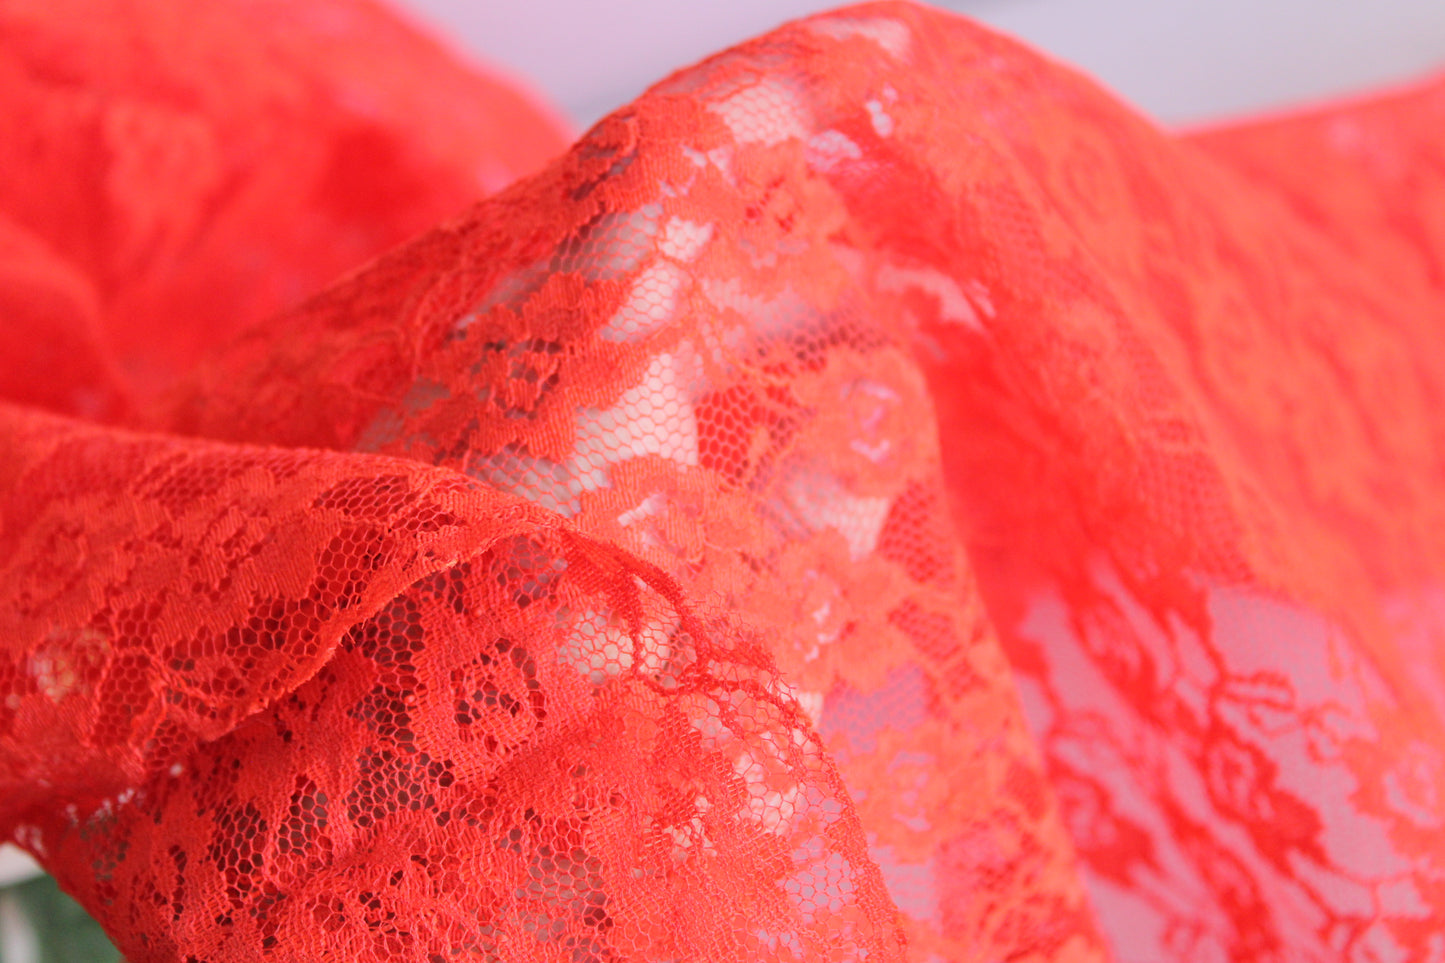 Vintage Red Lace Fabric Piece